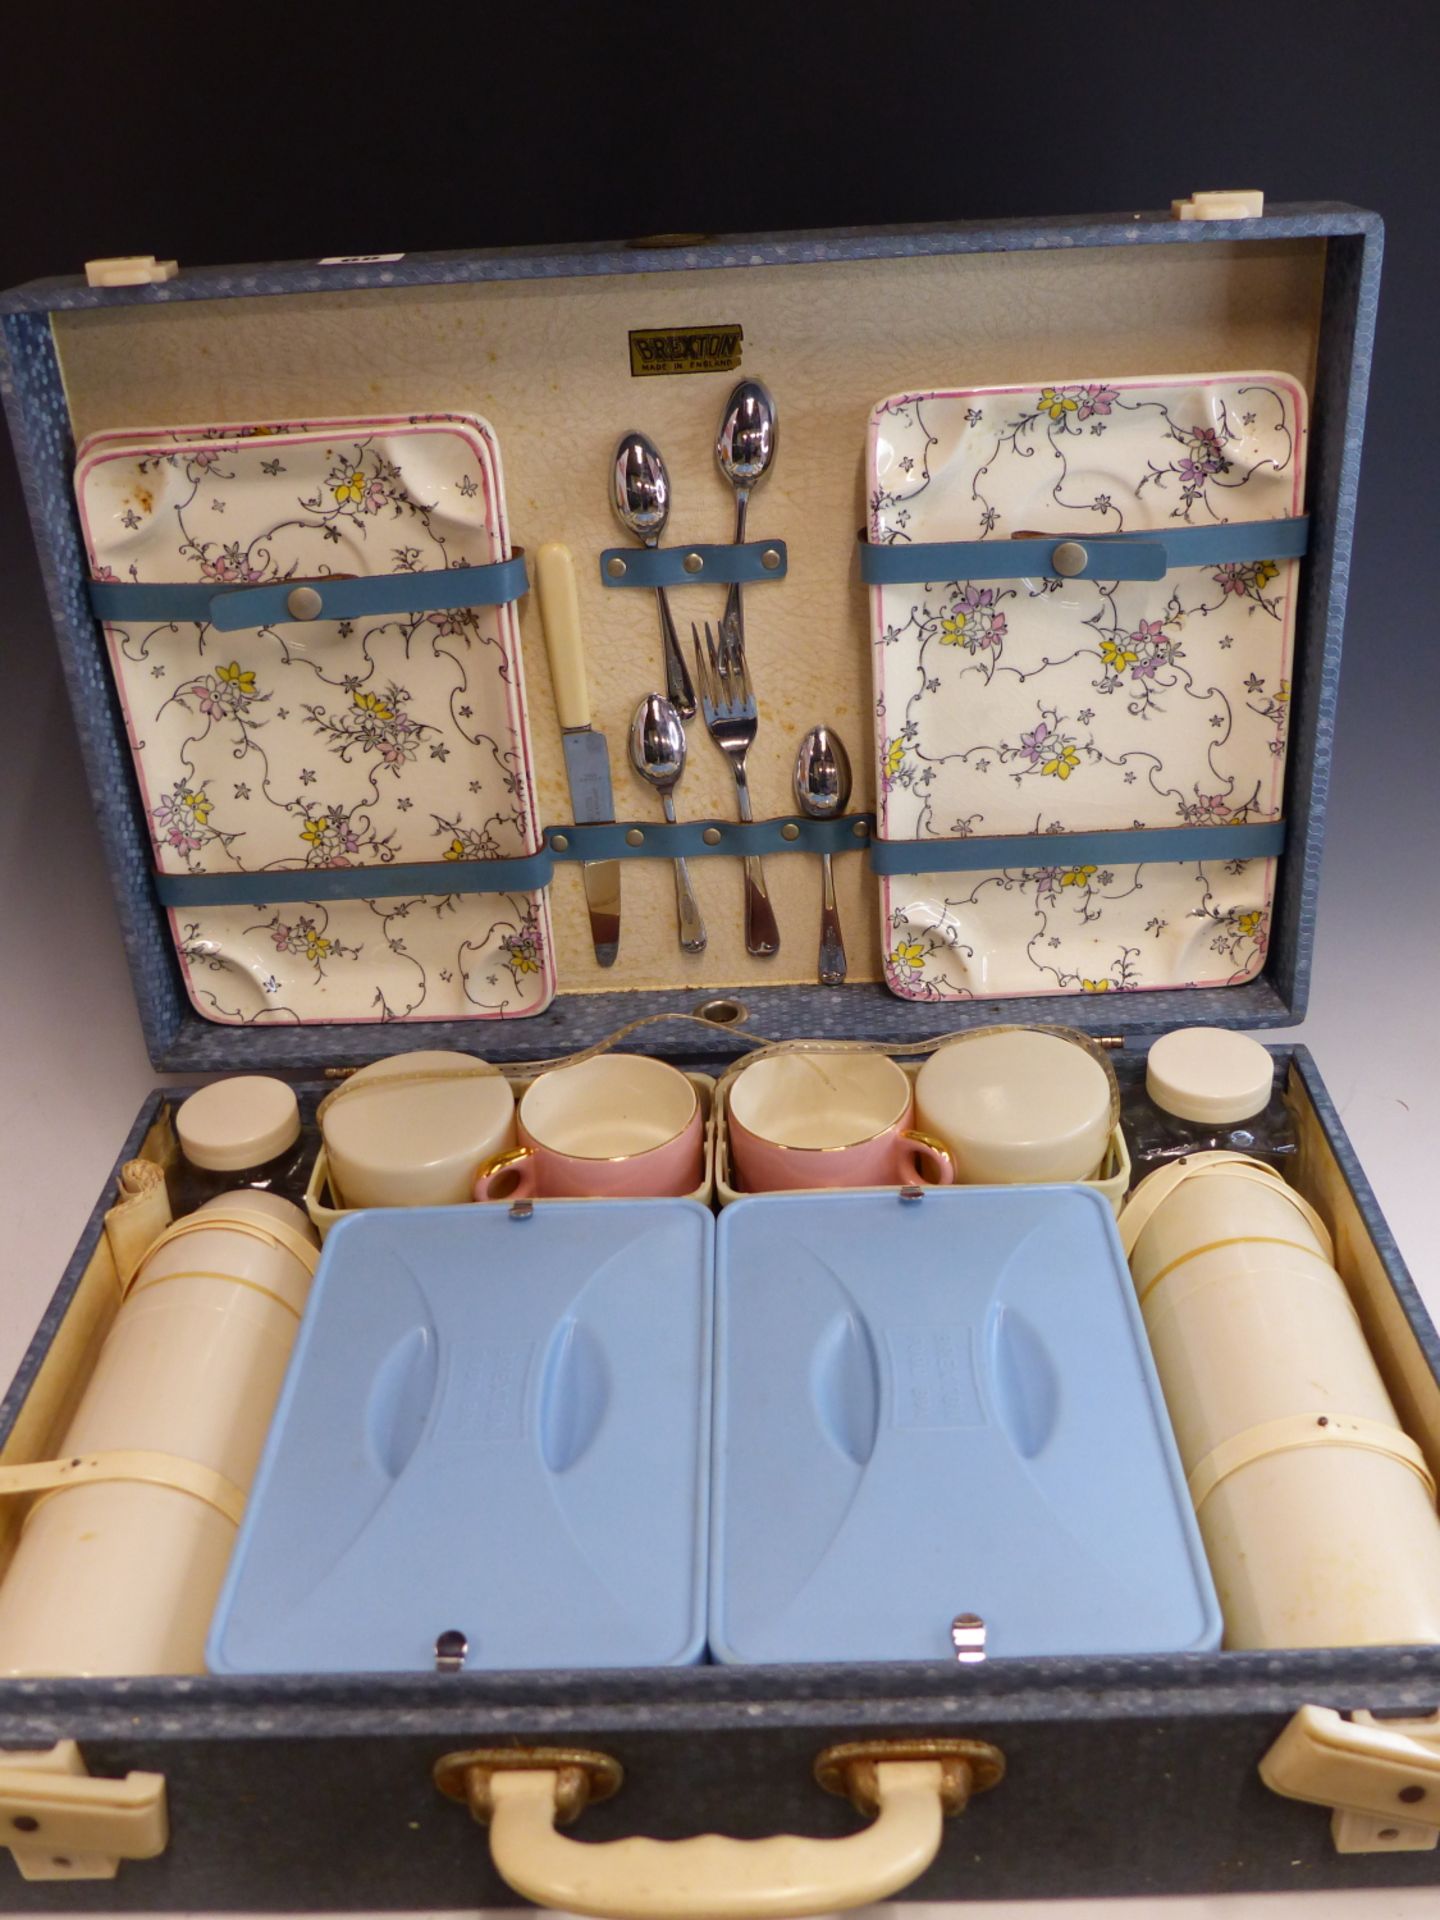 A VINTAGE BREXTON 1950'S FITTED PICNIC SET WITH WHITE BAKELITE FOLDING HANDLES.